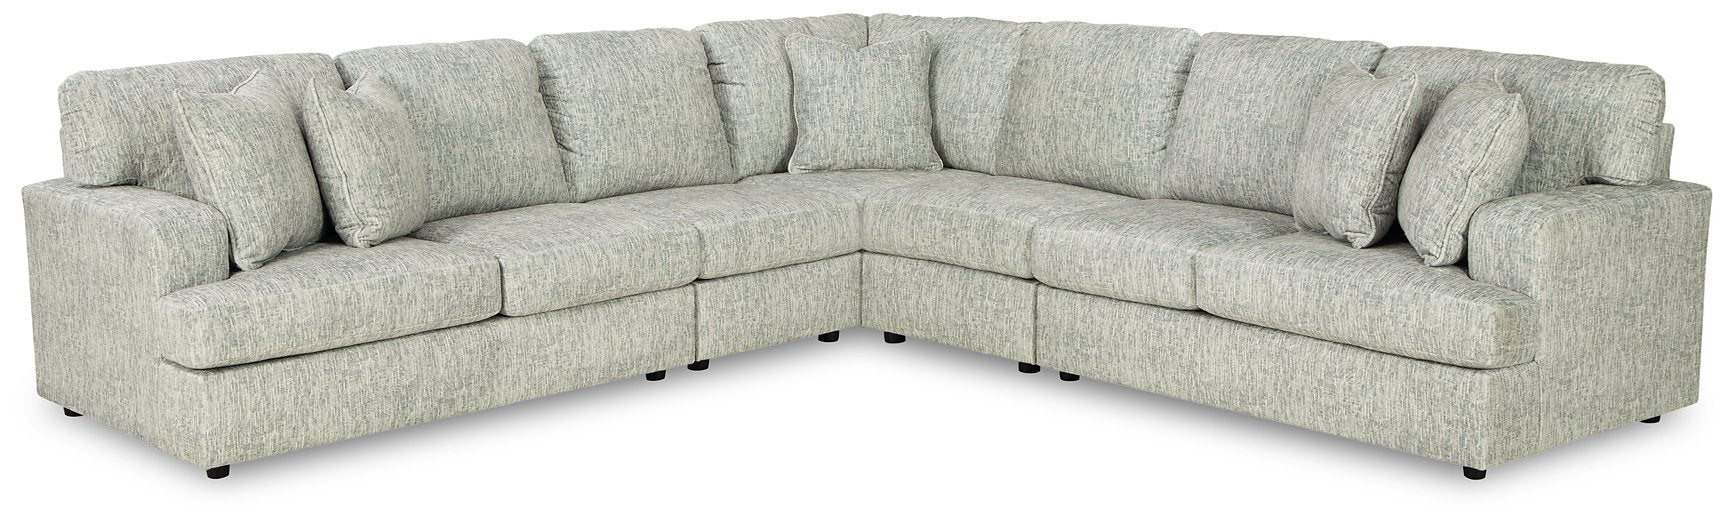 Playwrite Sectional